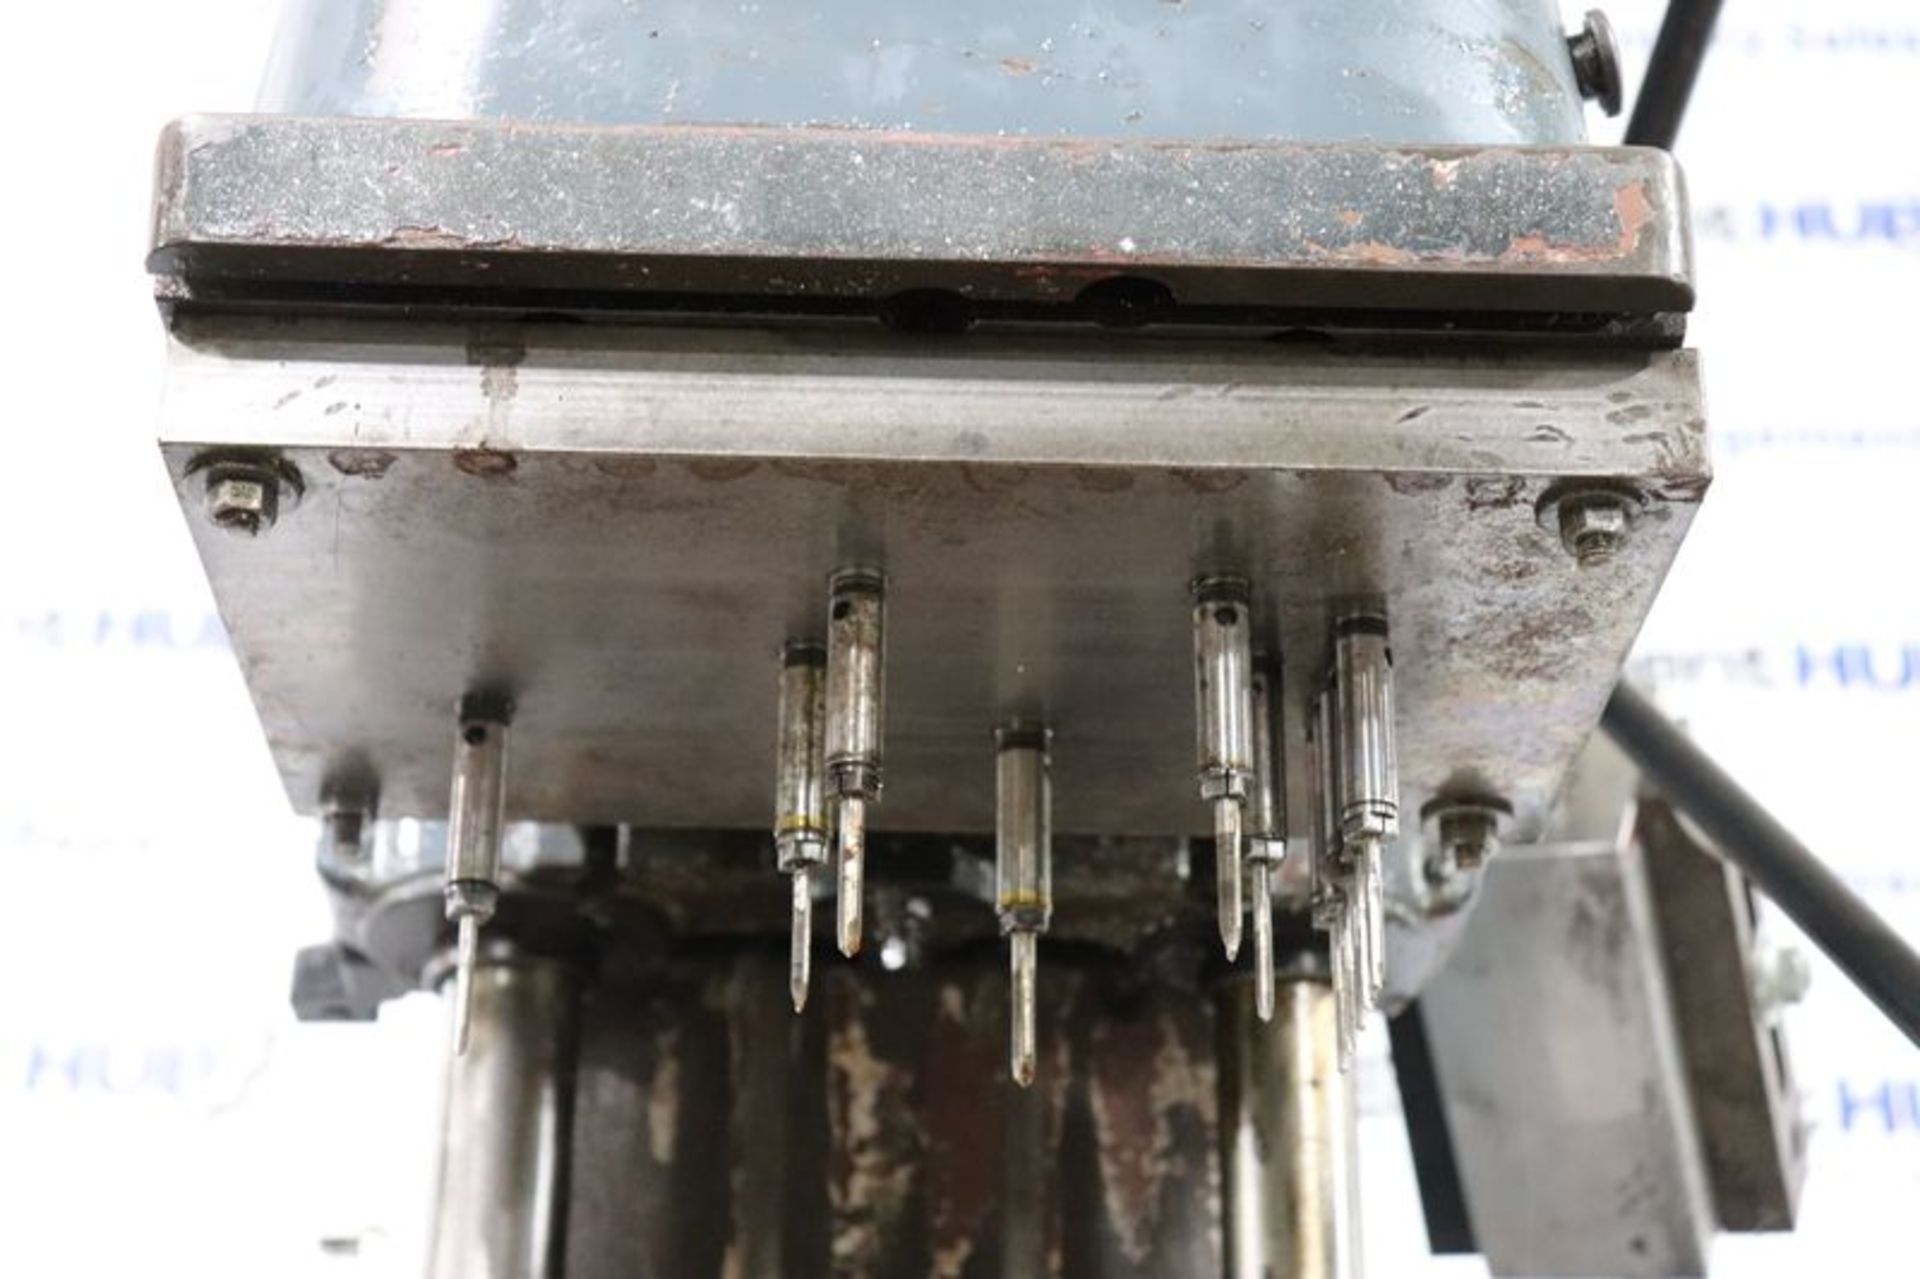 Steinel BB 300 Multi-Spindle Drilling & Tapping Machine - Image 6 of 12